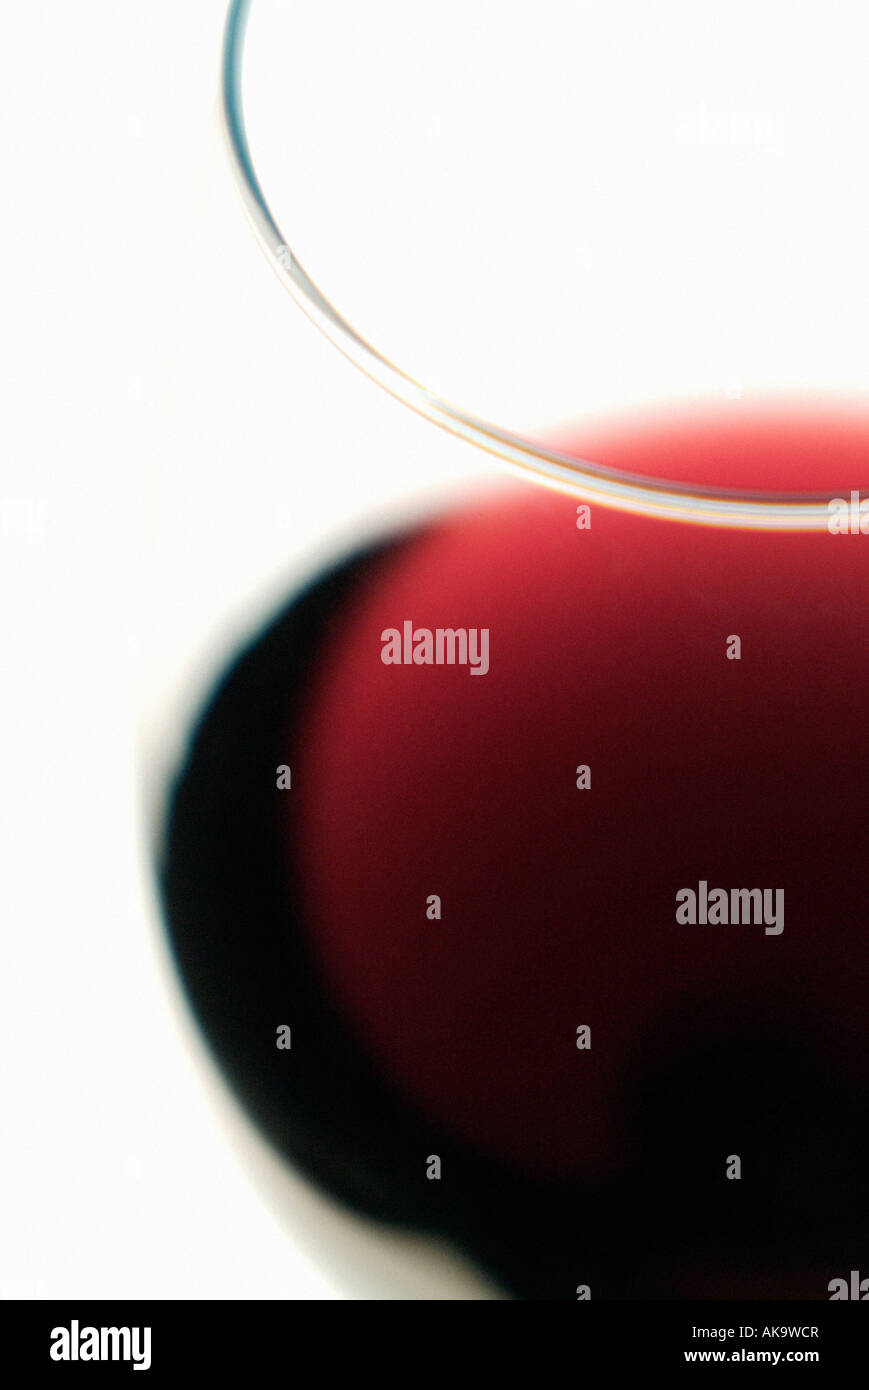 A red wine glass Stock Photo